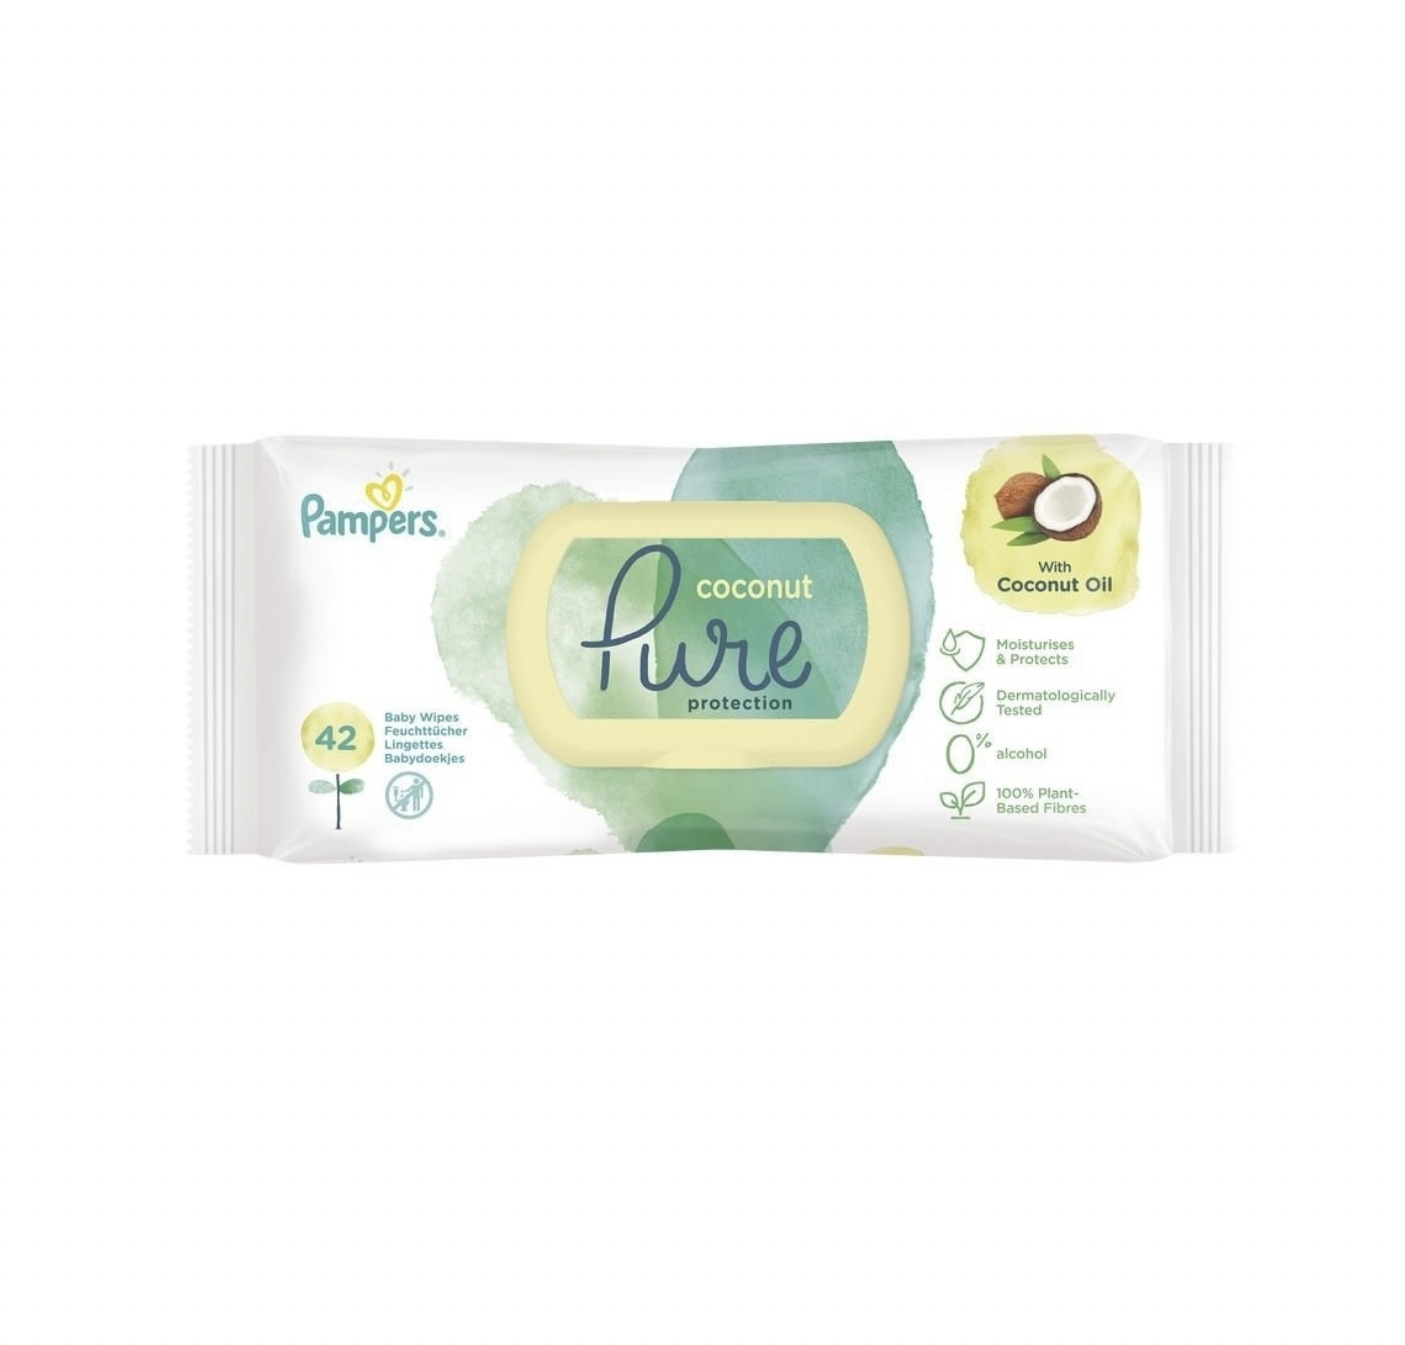   / Pampers -   Pure Protection Coconut 42 